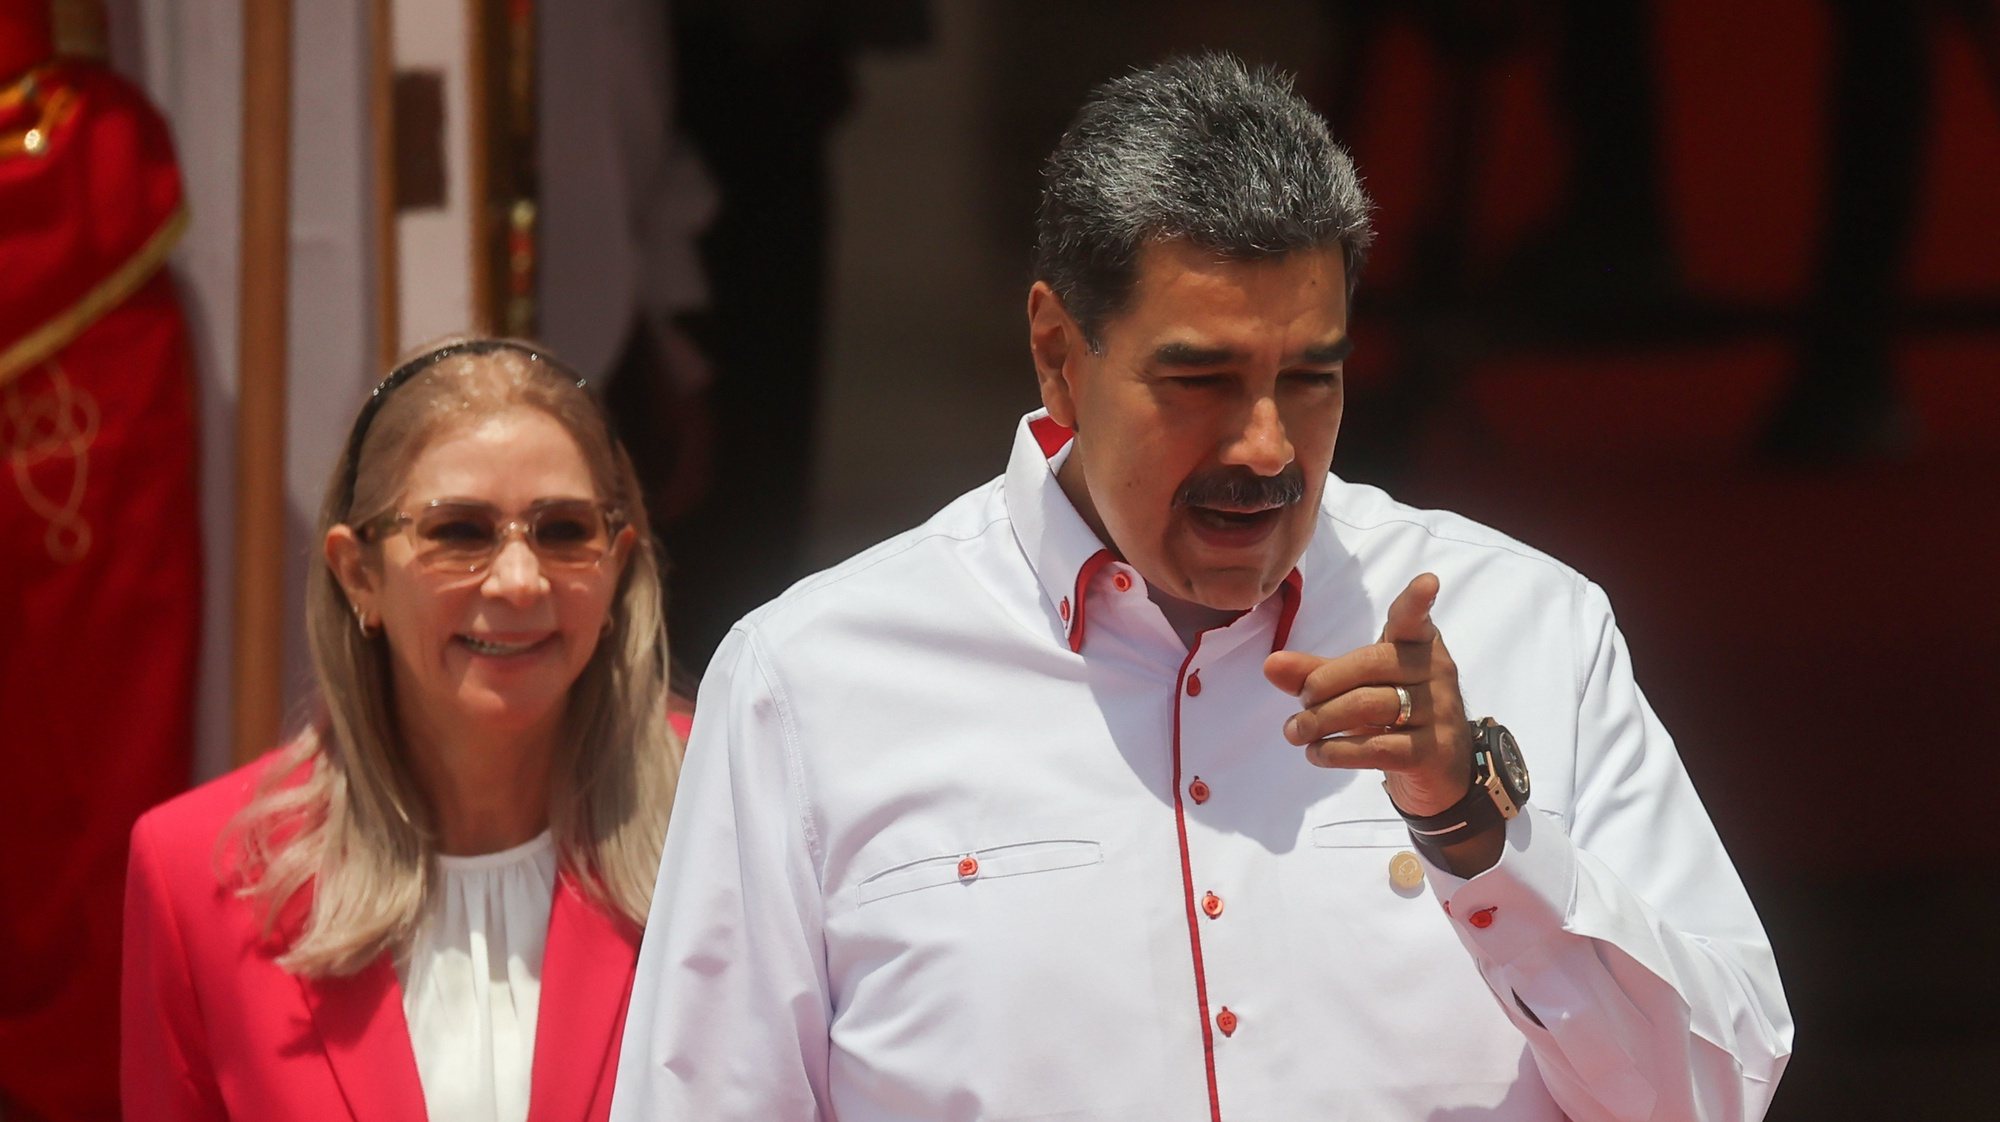 epa11298676 The president of Venezuela, Nicolas Maduro (C) prepares with the first lady Cilia Flores (L), to receive the leaders who will participate in the ALBA Summit at the Miraflores Palace, in Caracas, Venezuela, 24 April 2024. The XXIII Summit of the Bolivarian Alliance for the Peoples of Our America (ALBA) brings together in Caracas presidents of several bloc countries, among them, the Cuban Miguel Diaz-Canel, the Nicaraguan Daniel Ortega, and the Bolivian Luis Arce, who will meet with their Venezuelan counterpart Nicolas Maduro in a conclave in which they will address issues of common interest.  EPA/Miguel Gutierrez